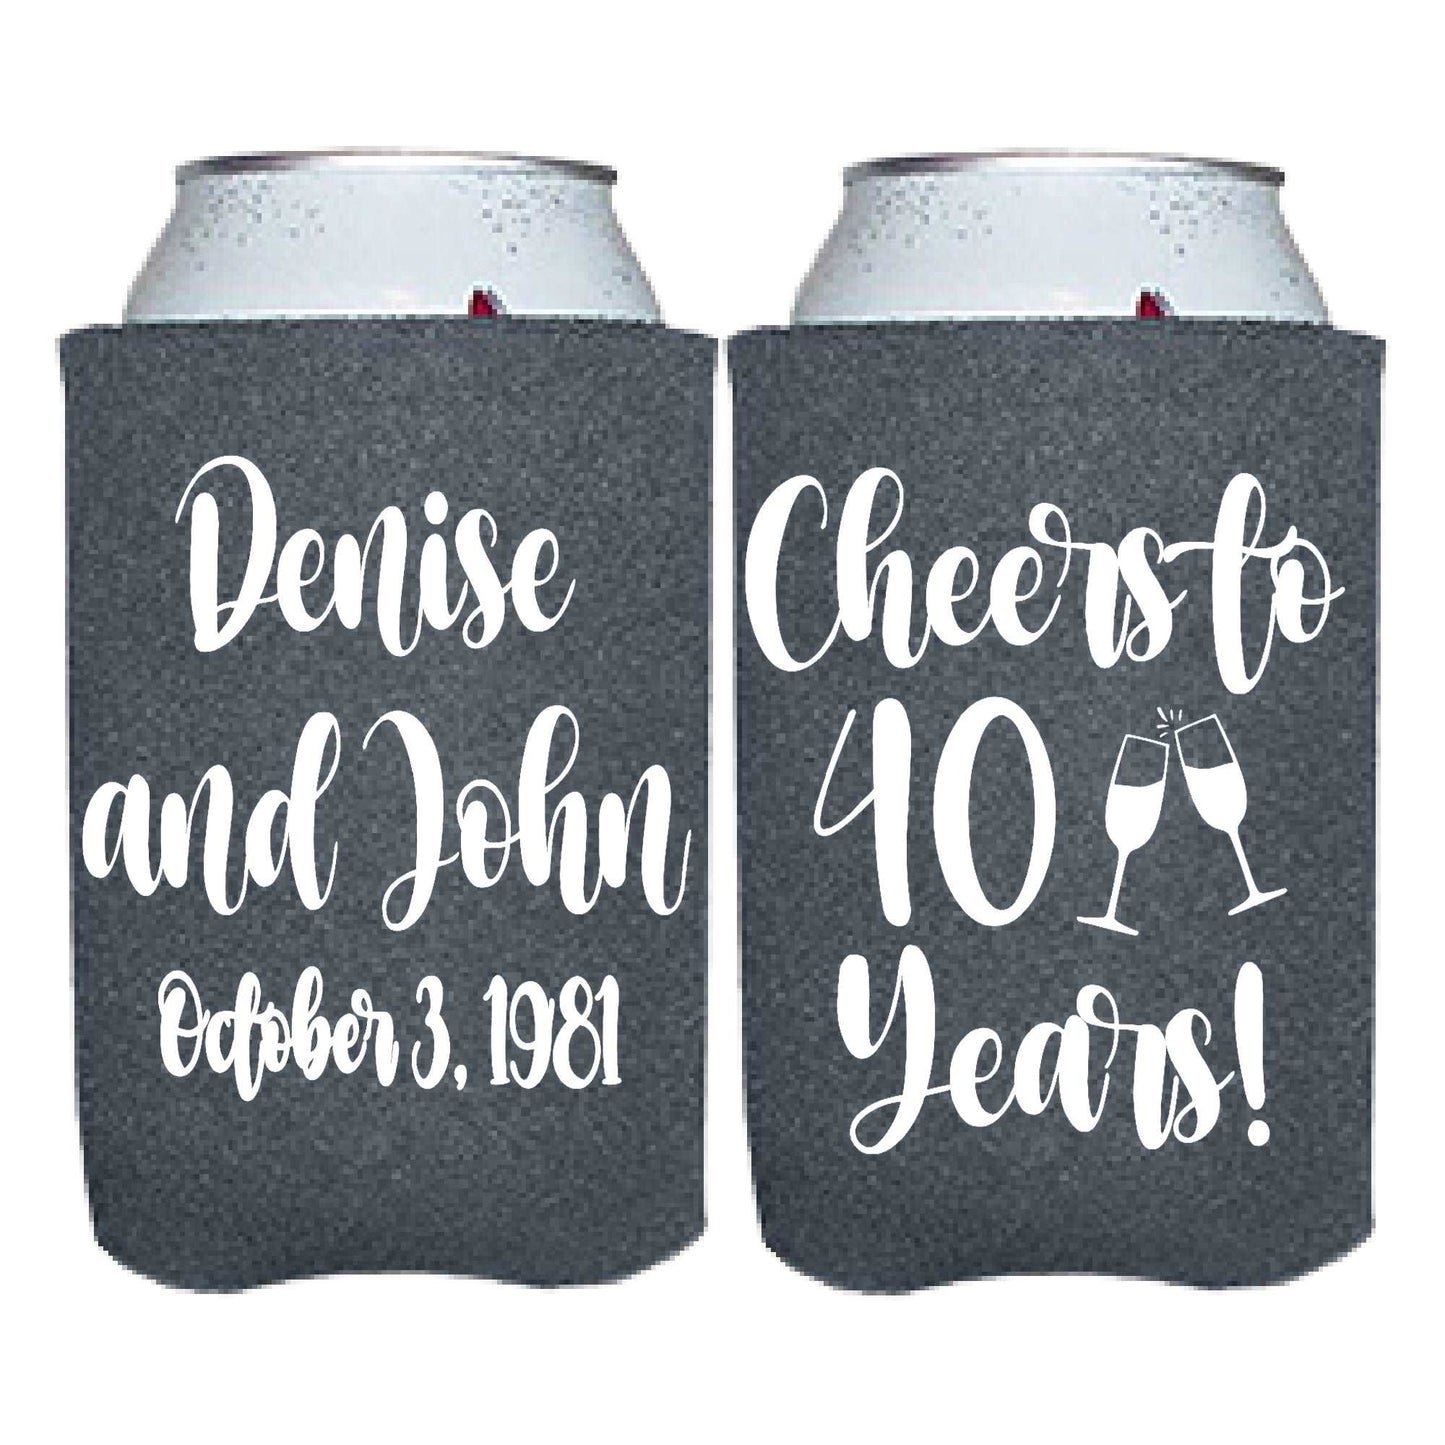 Cheers to 40 Years Screen Printed Can Cooler freeshipping - Be Vocal Designs